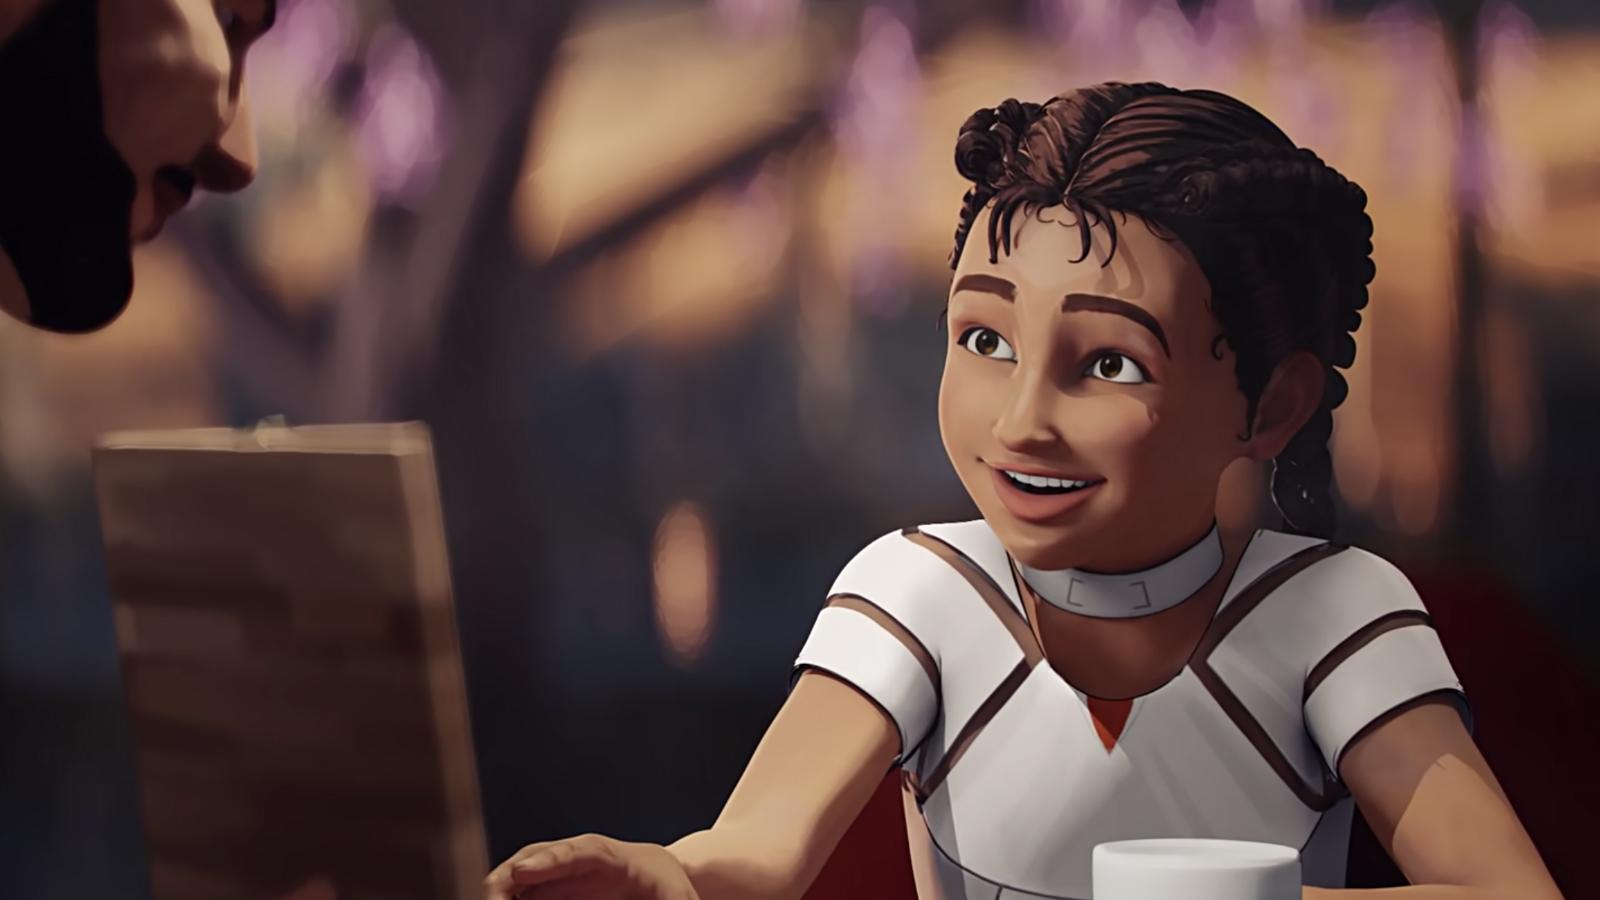 Young girl animated sitting at table in apex legends trailer